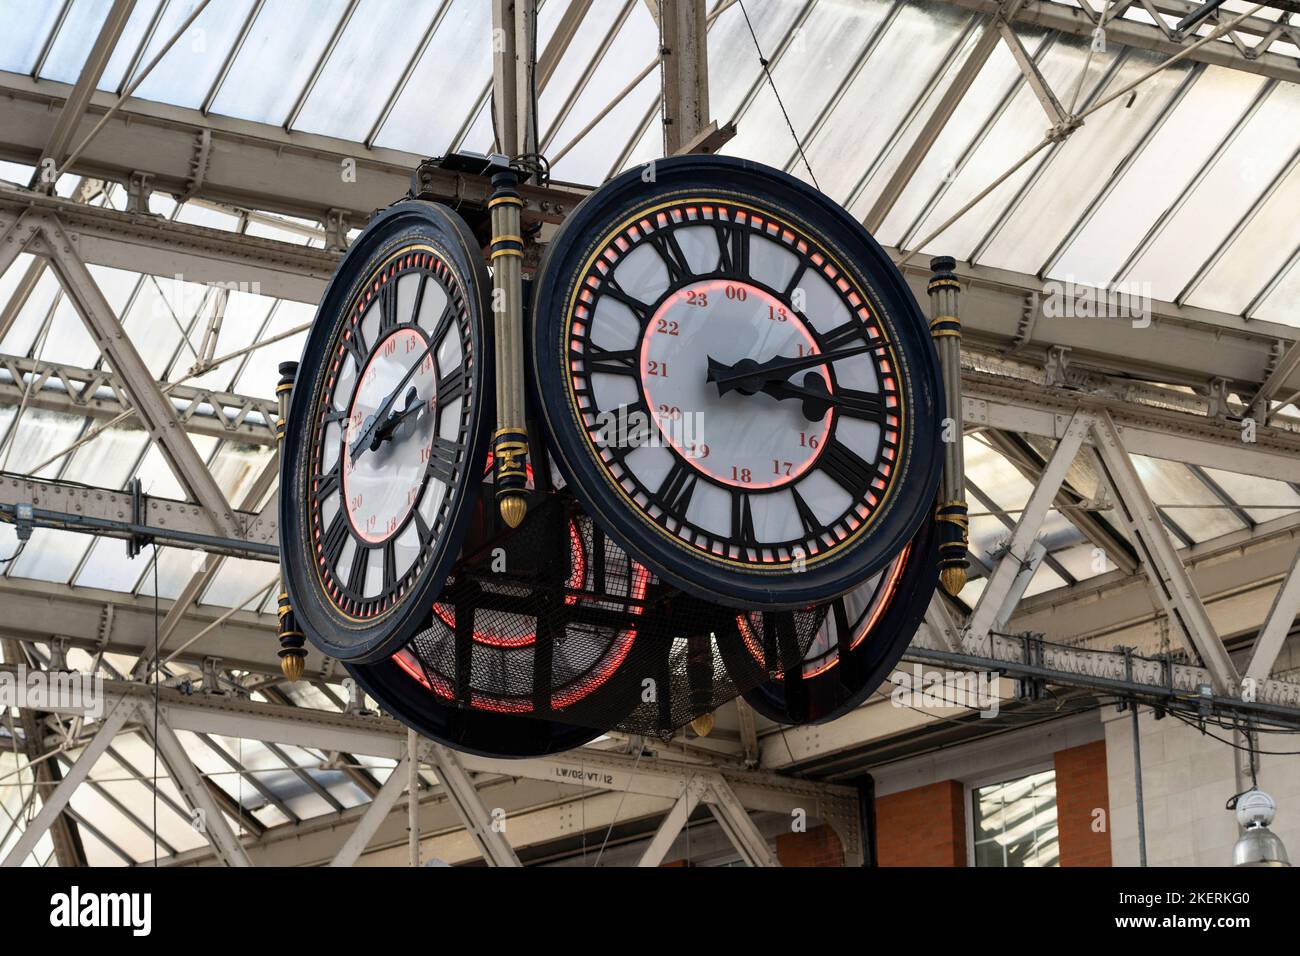 The four sided hanging clock at Waterloo train station hangs above the main concourse and is a favourite spot for romantics to meet. London, England Stock Photo